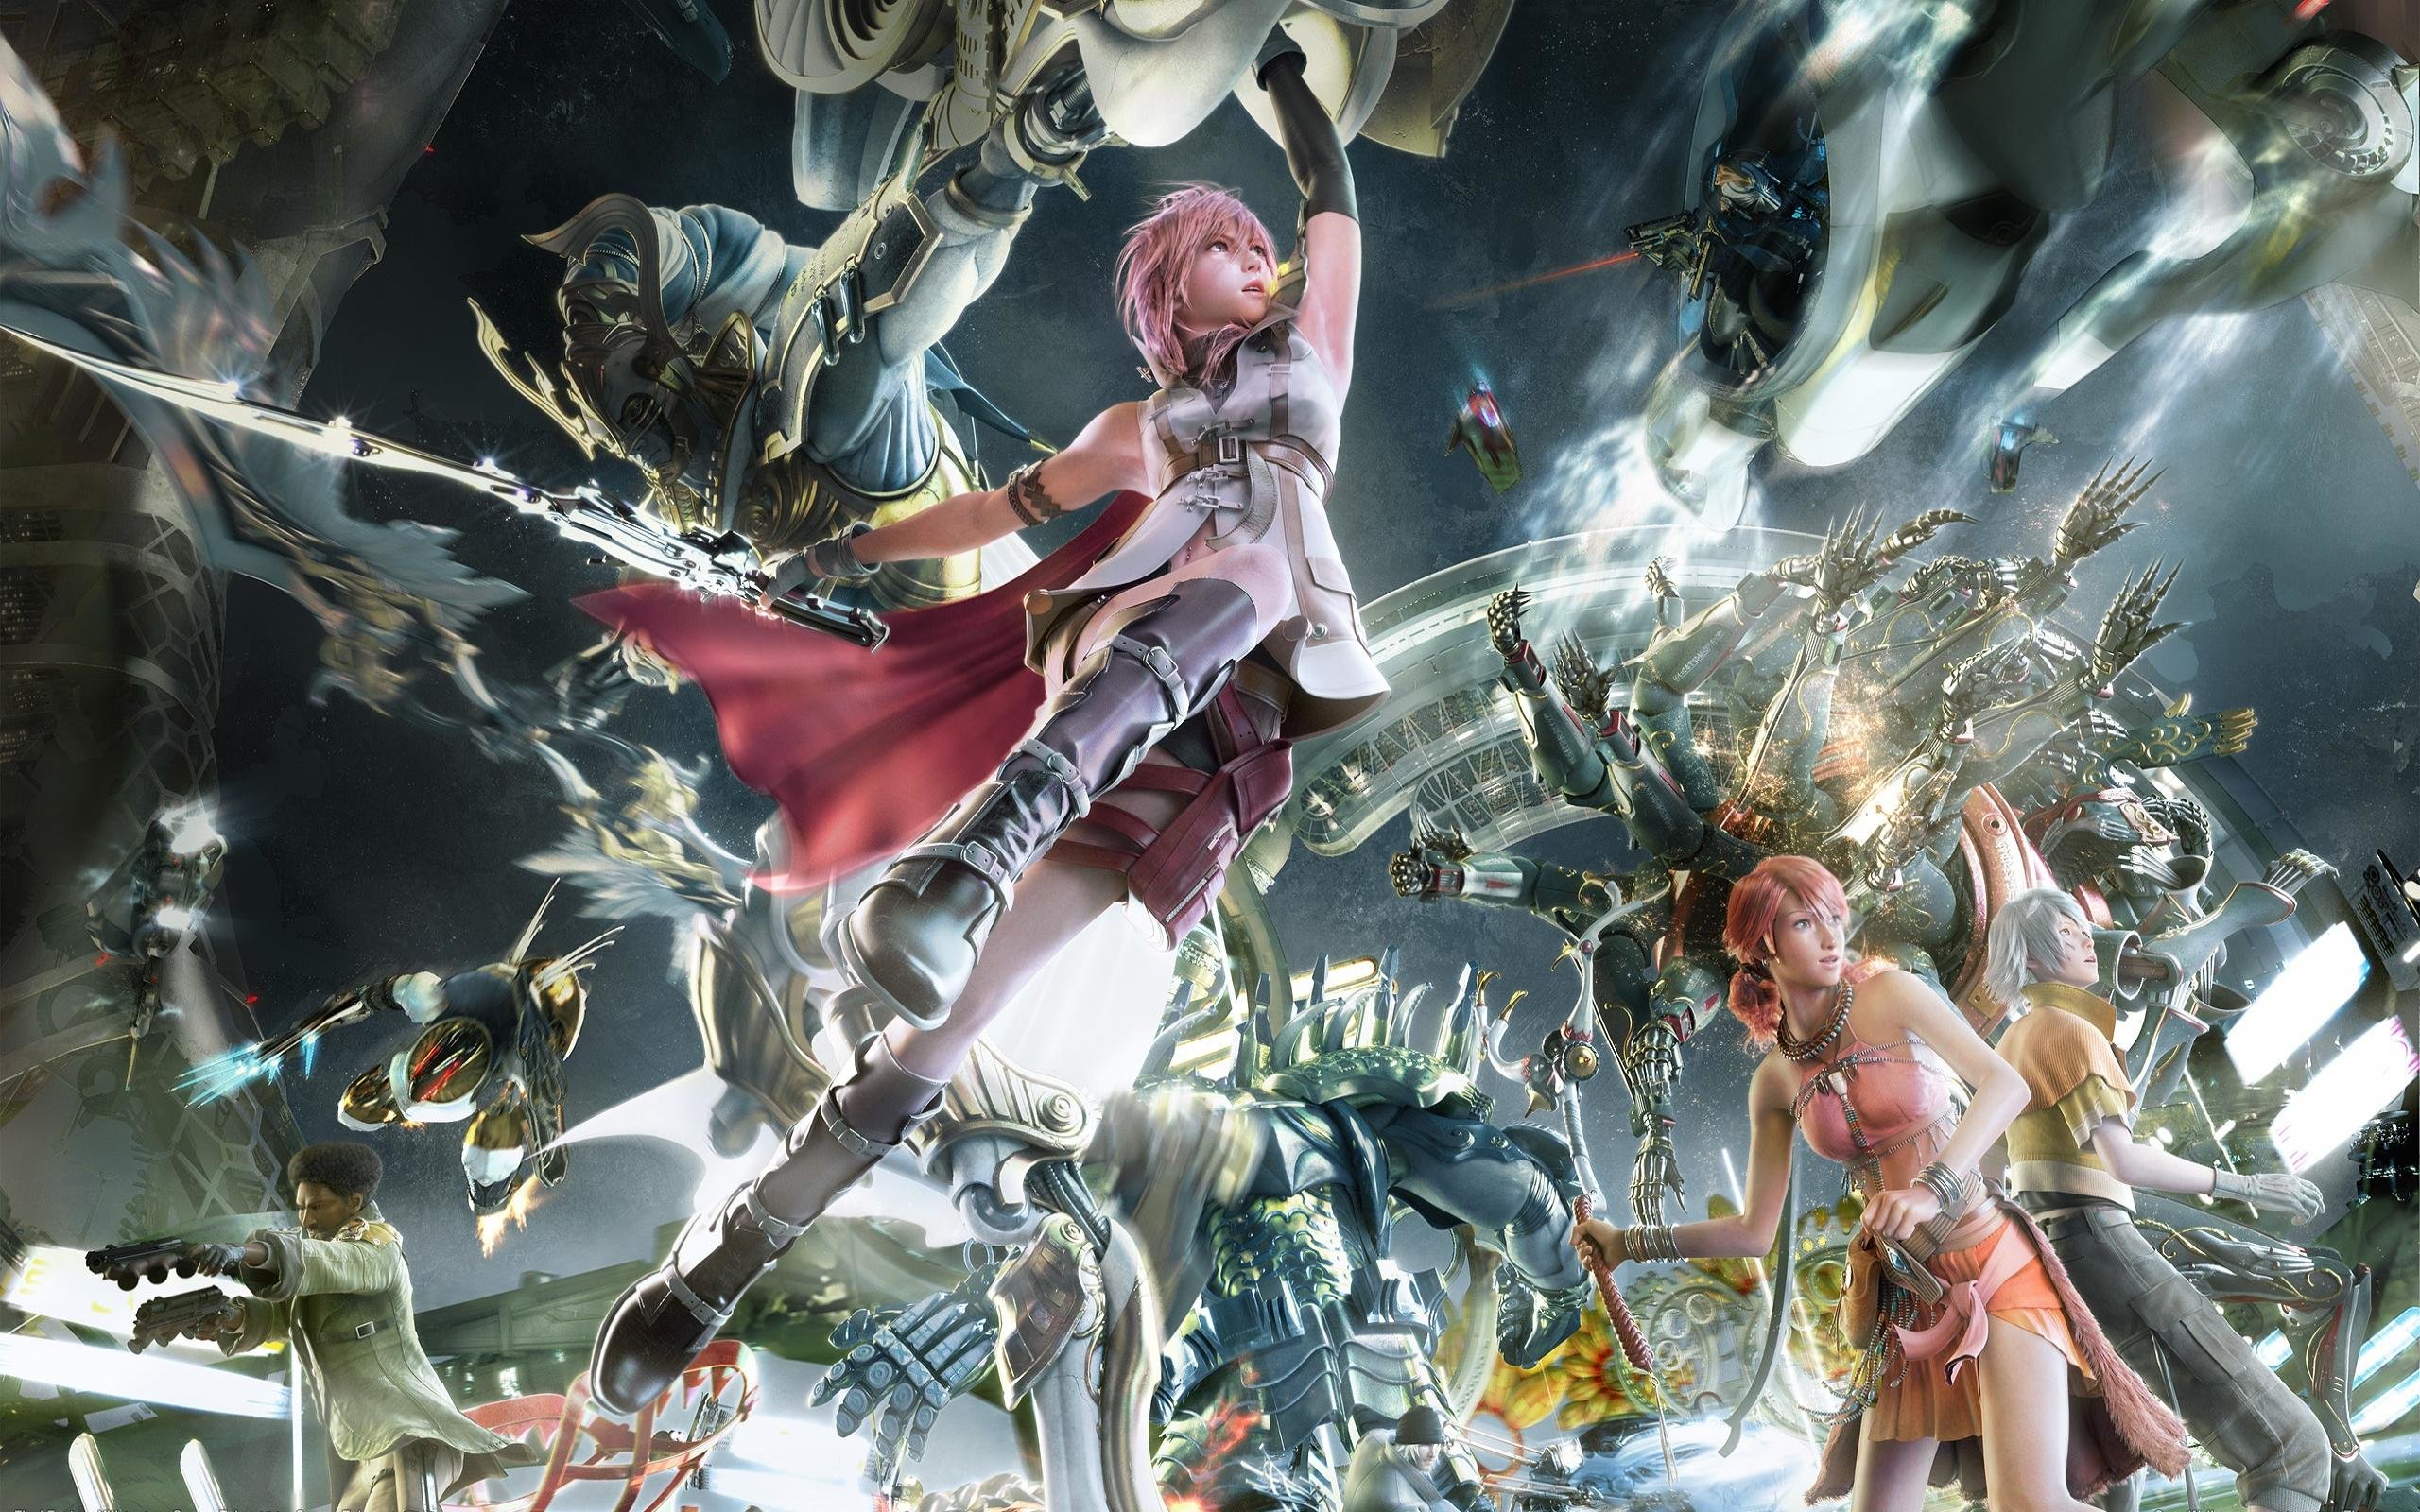 Download Hd 2560x1600 Final Fantasy Xiii Ff13 Pc Wallpaper Id For Free